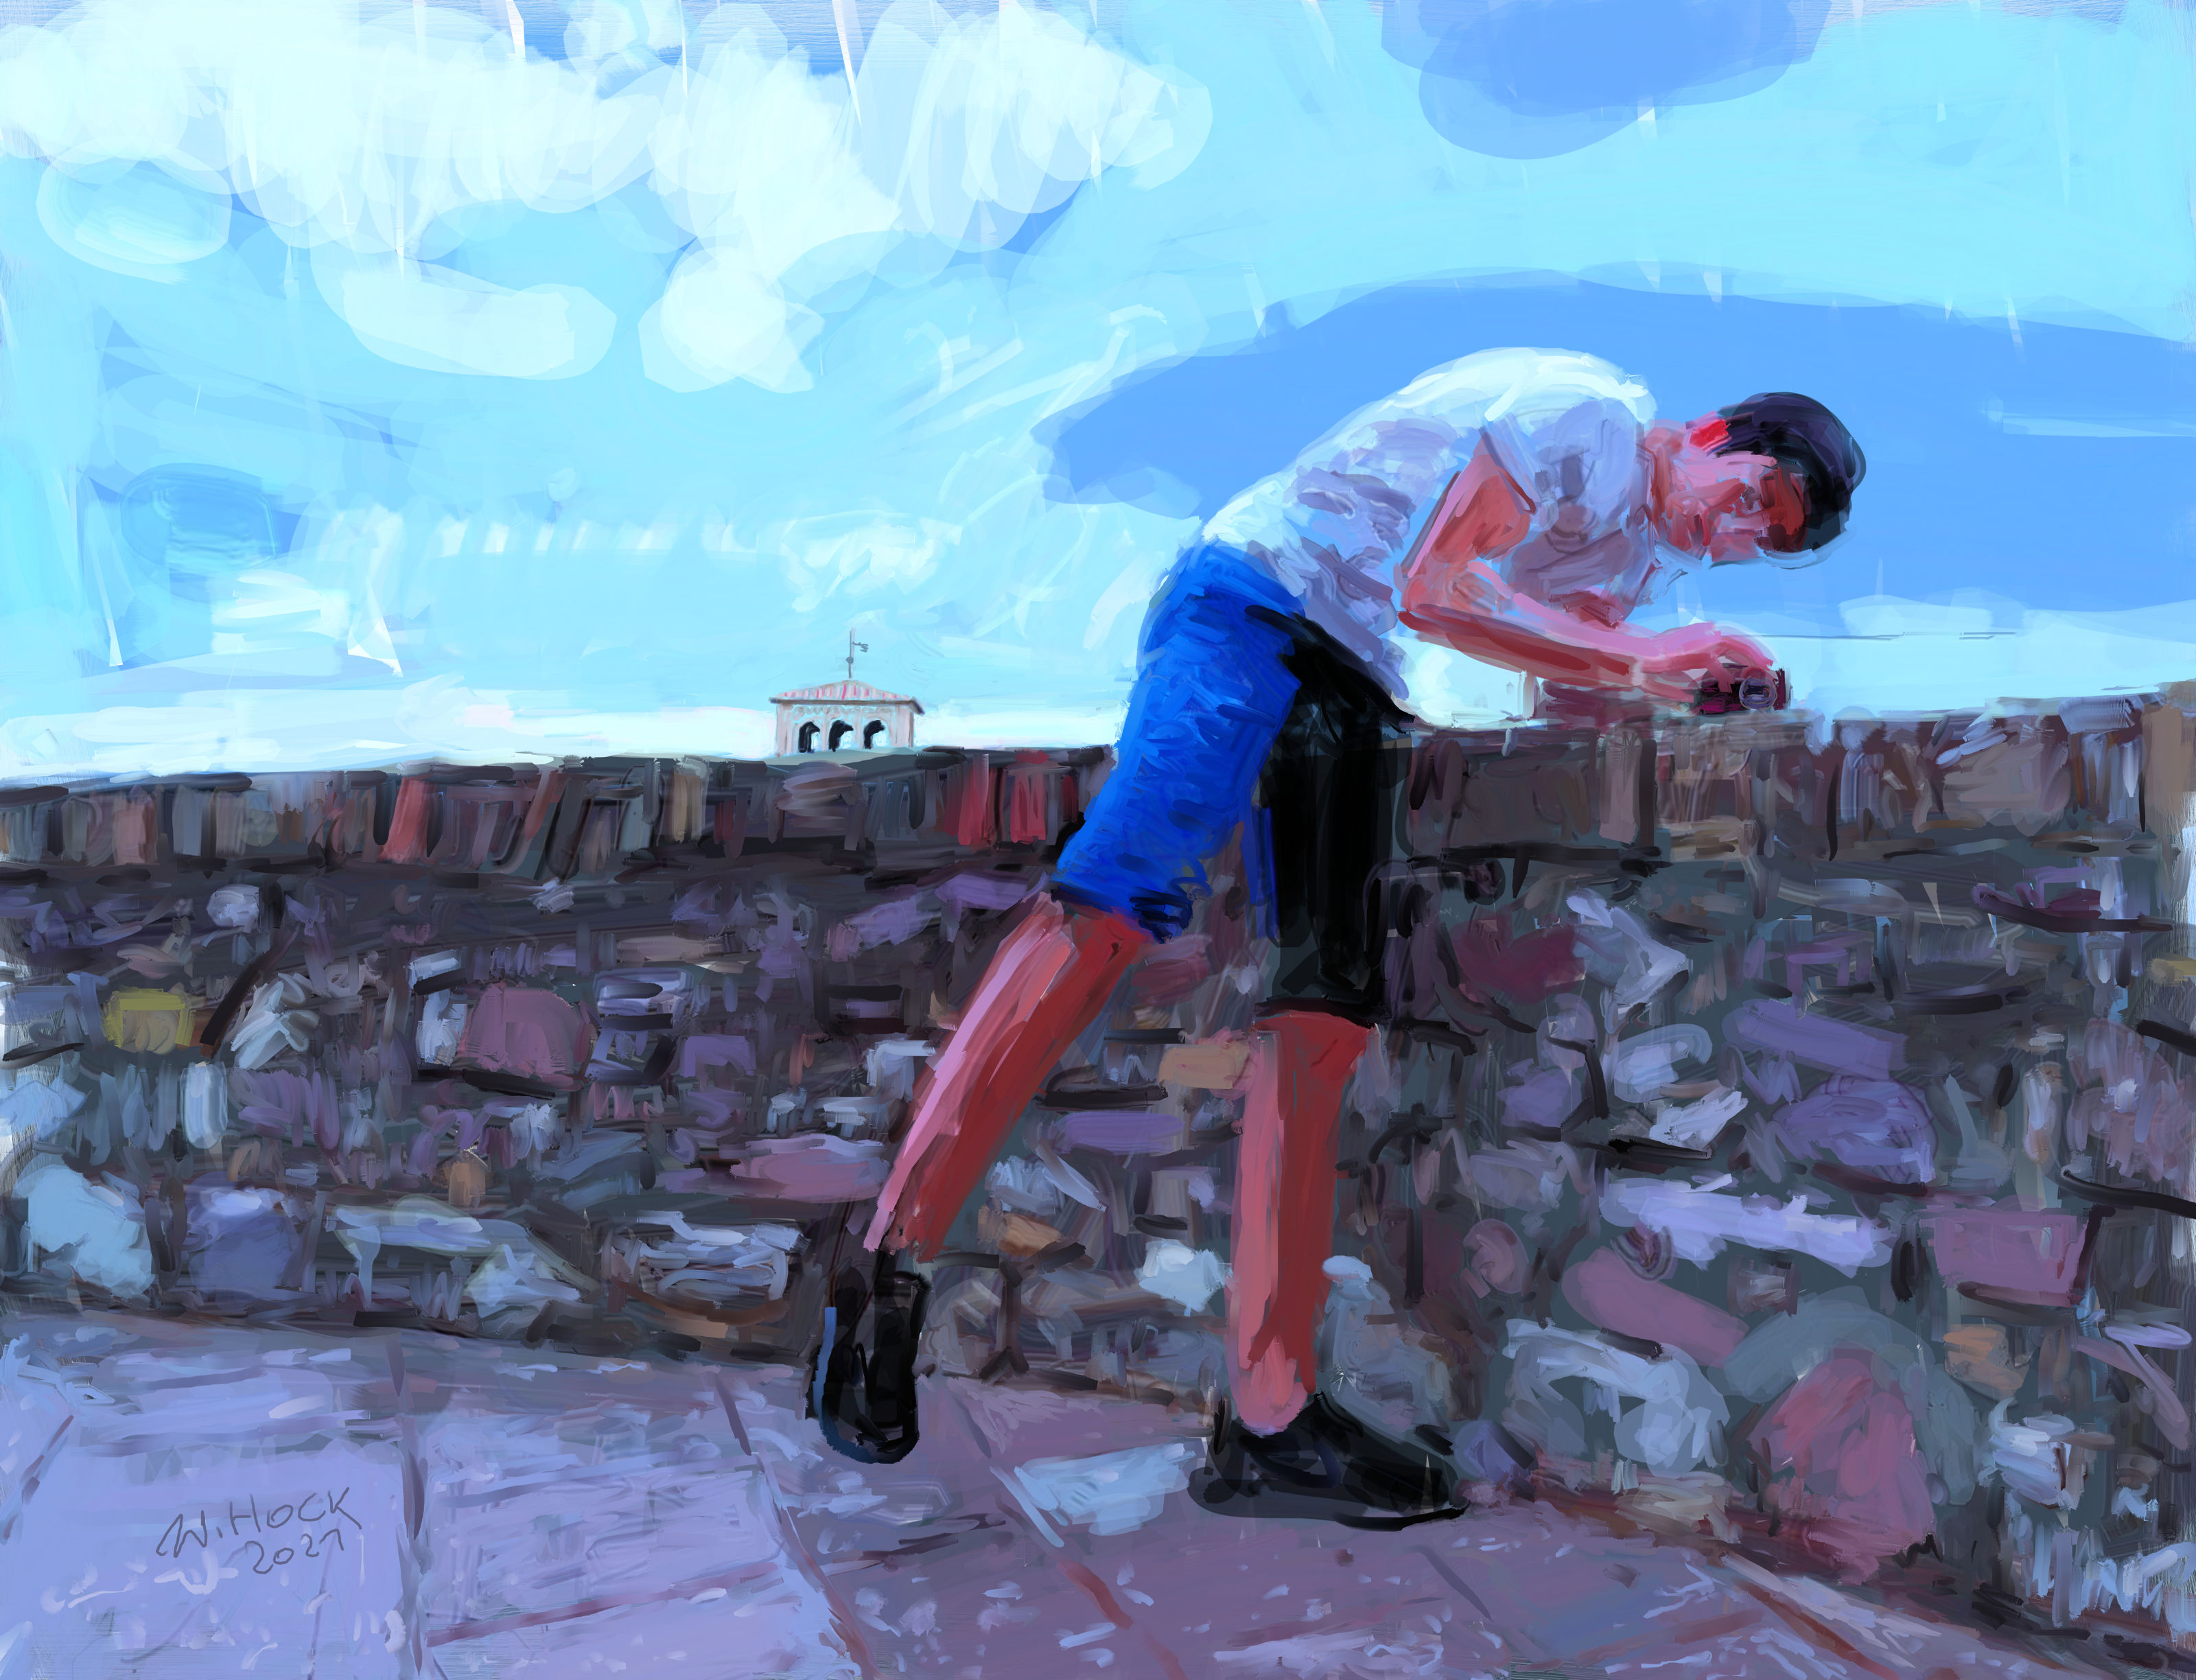 Taking pictures 2021   Handmade digital painting on canvas 170 x 130 cm (205 megapixels)